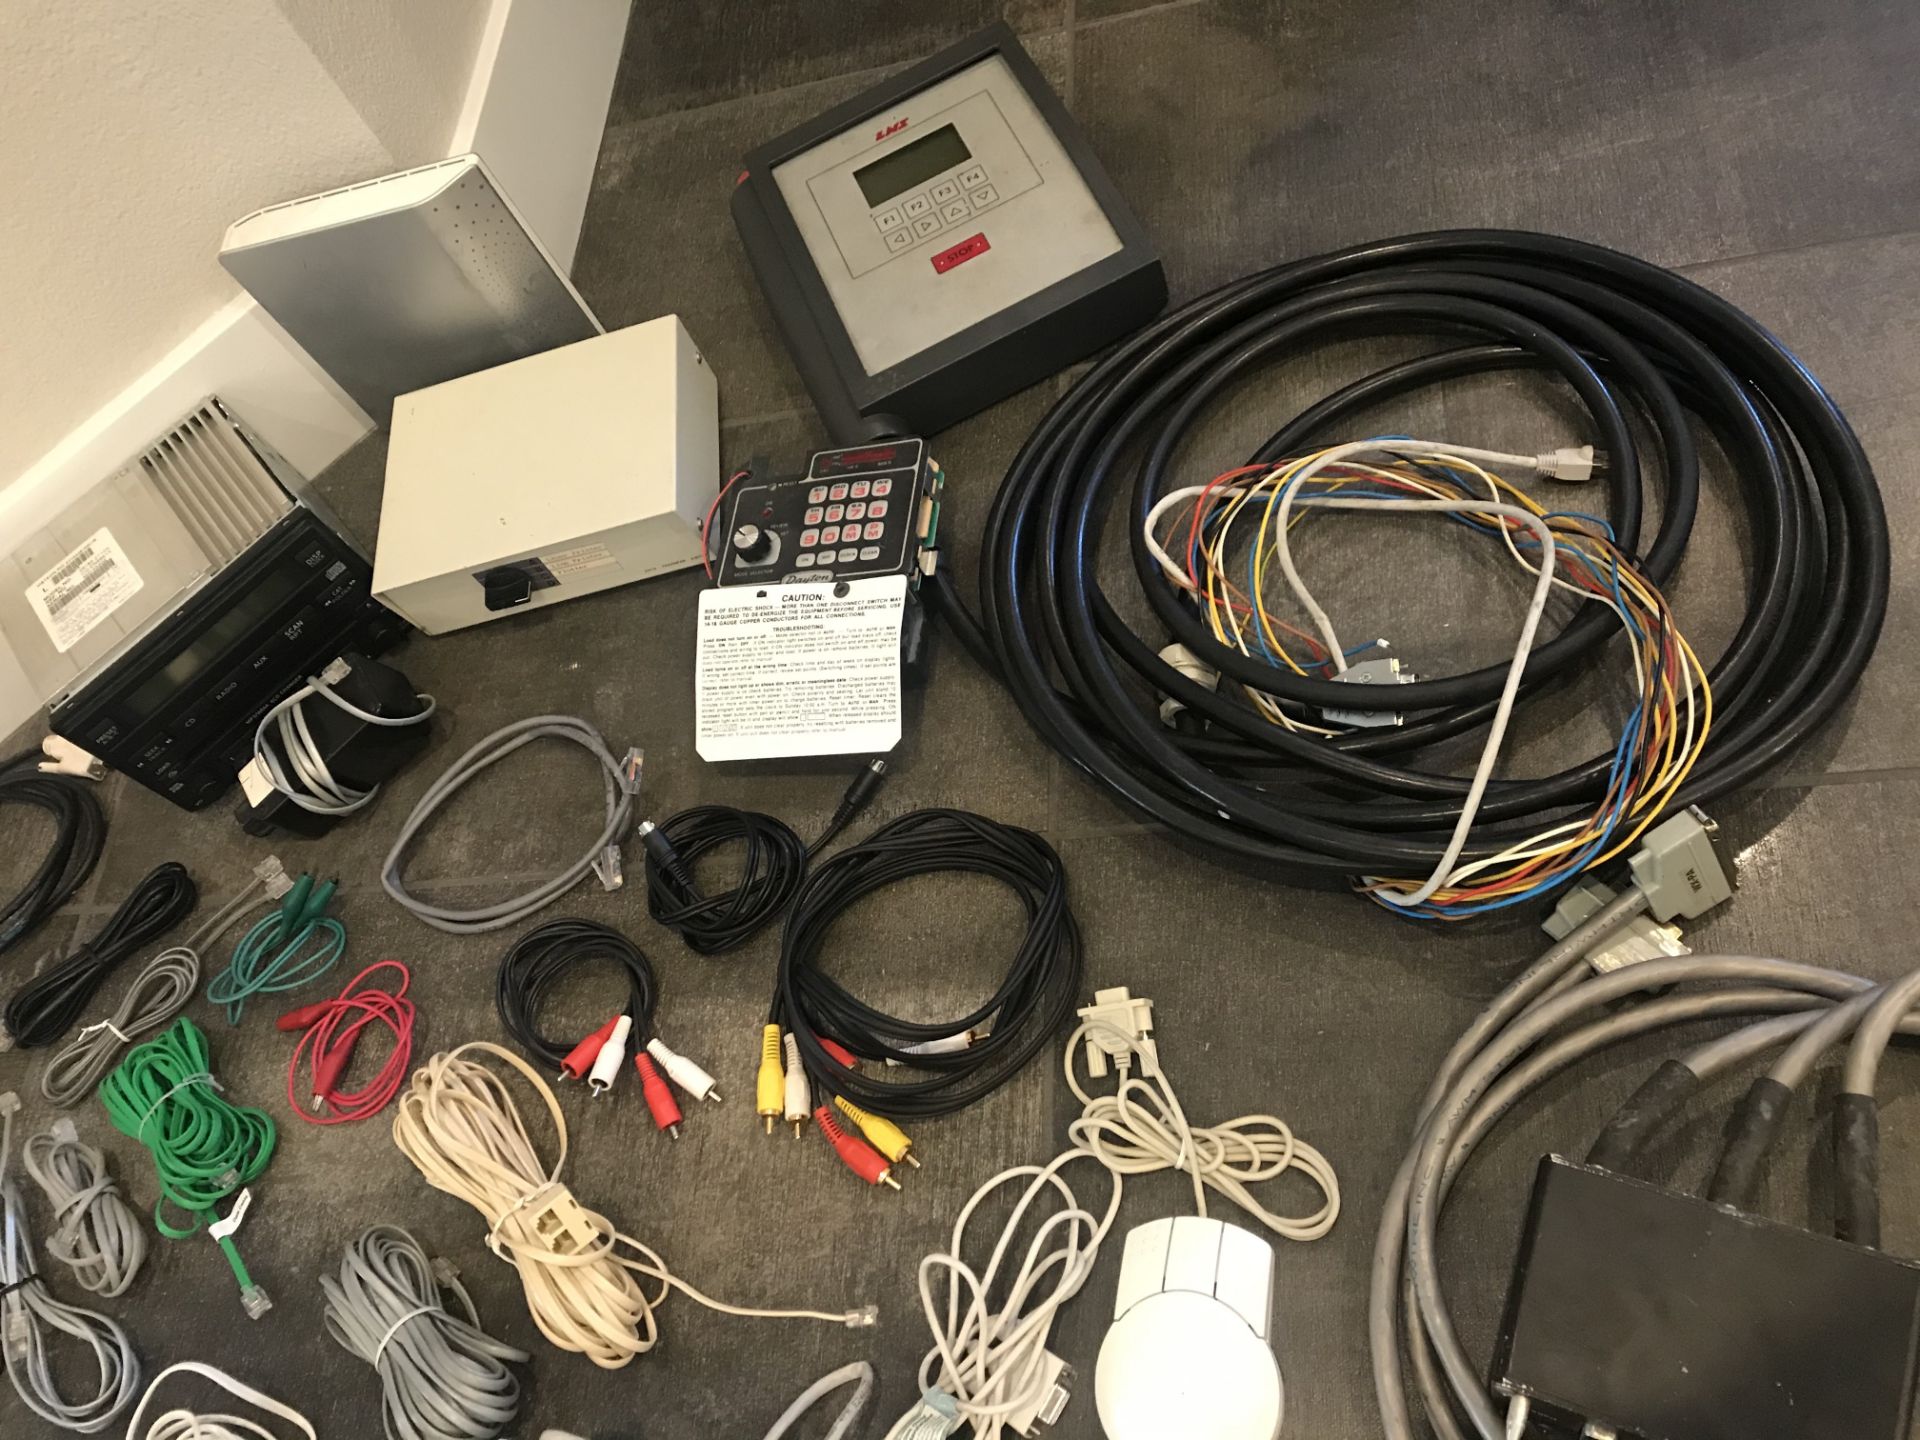 ASSORTED LOT OF ELECTRONIC OUTLETS, WIRES, SWITCH BOX, PORTABLE HEATER, CAR RADIO AND COMPUTER MICE. - Image 2 of 5